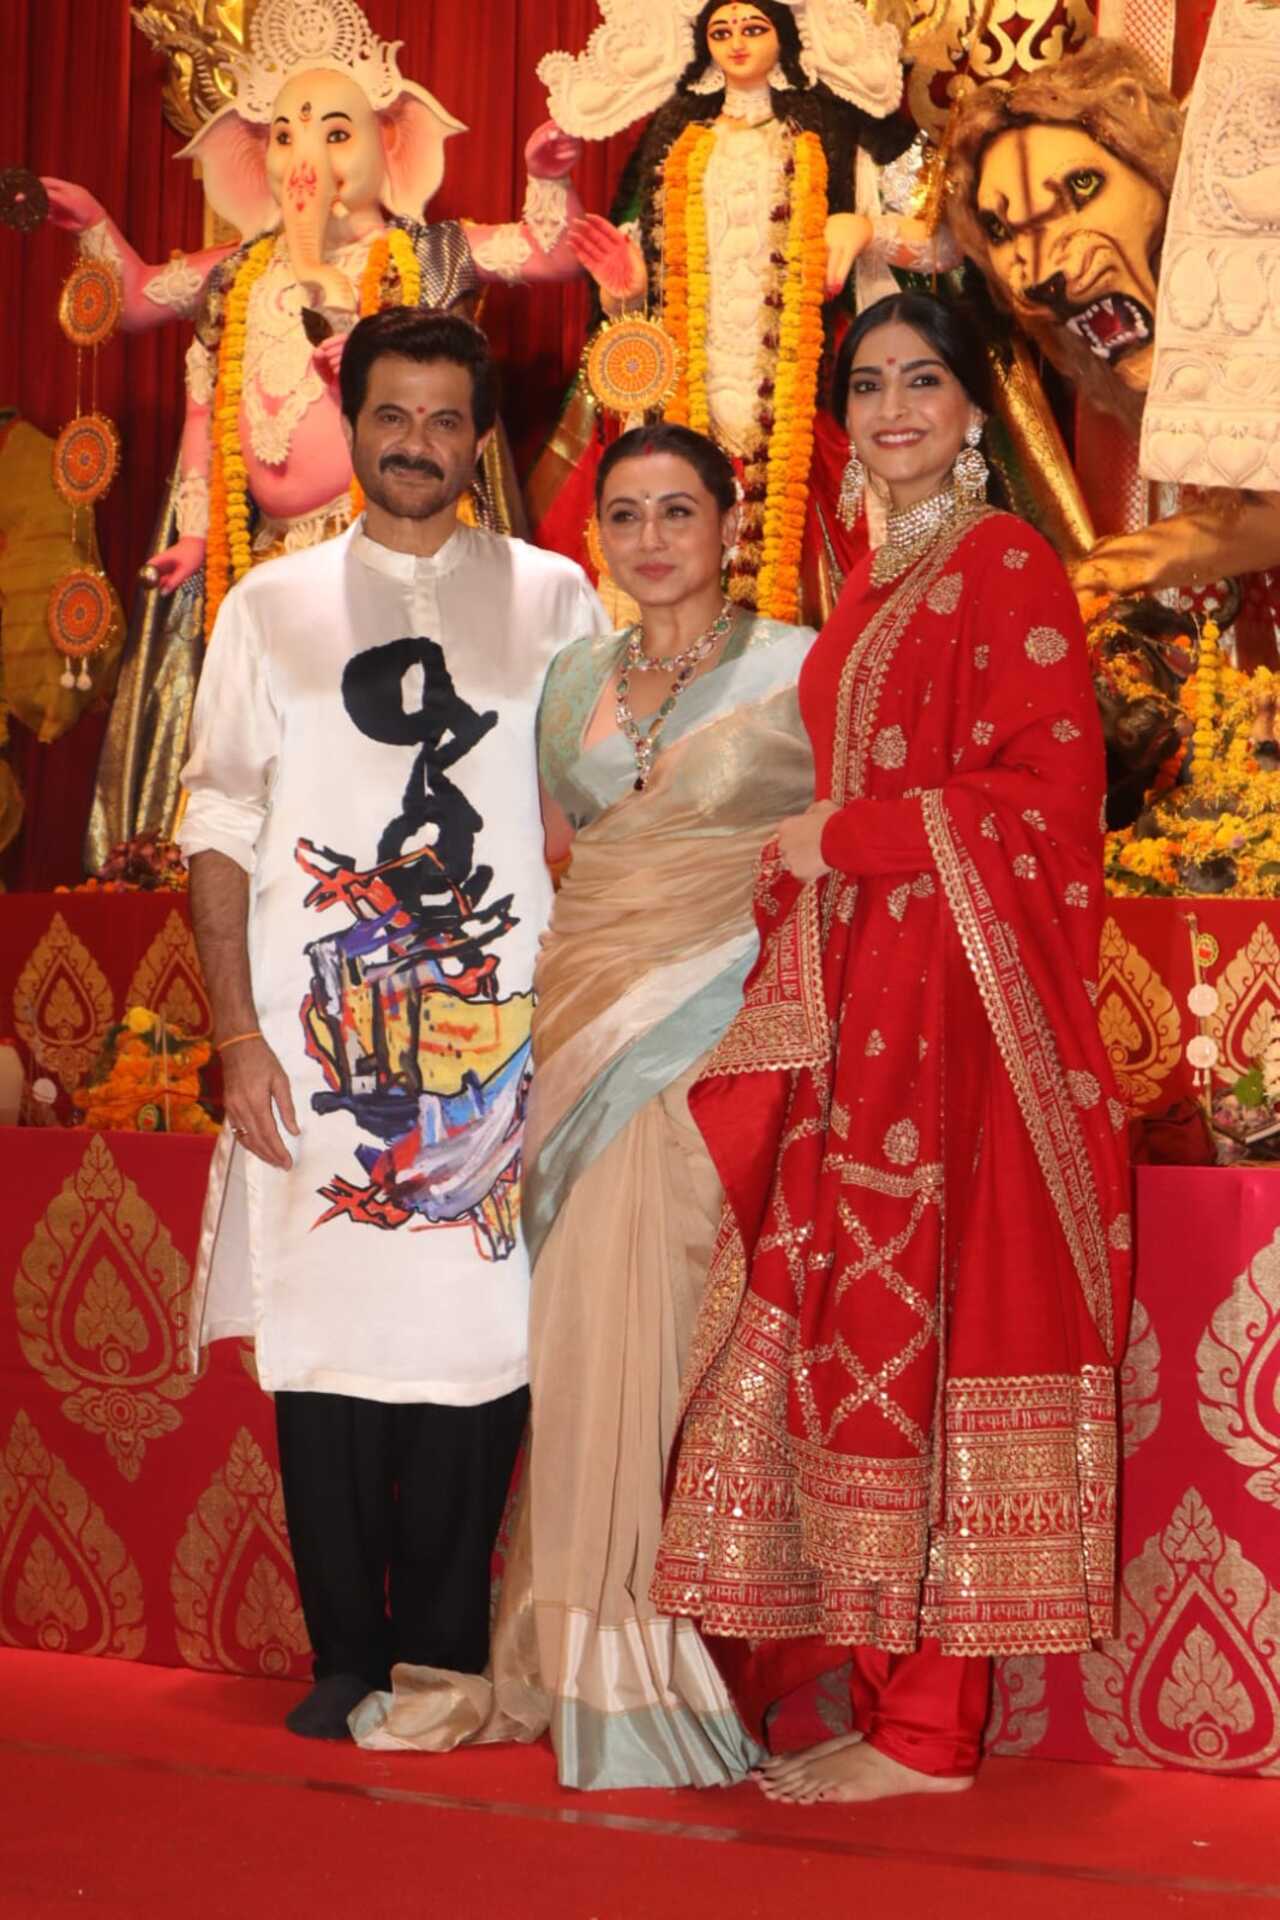 Anil Kapoor visited the pandal with his wife Sunita Kapoor and daughter Sonam Kapoor